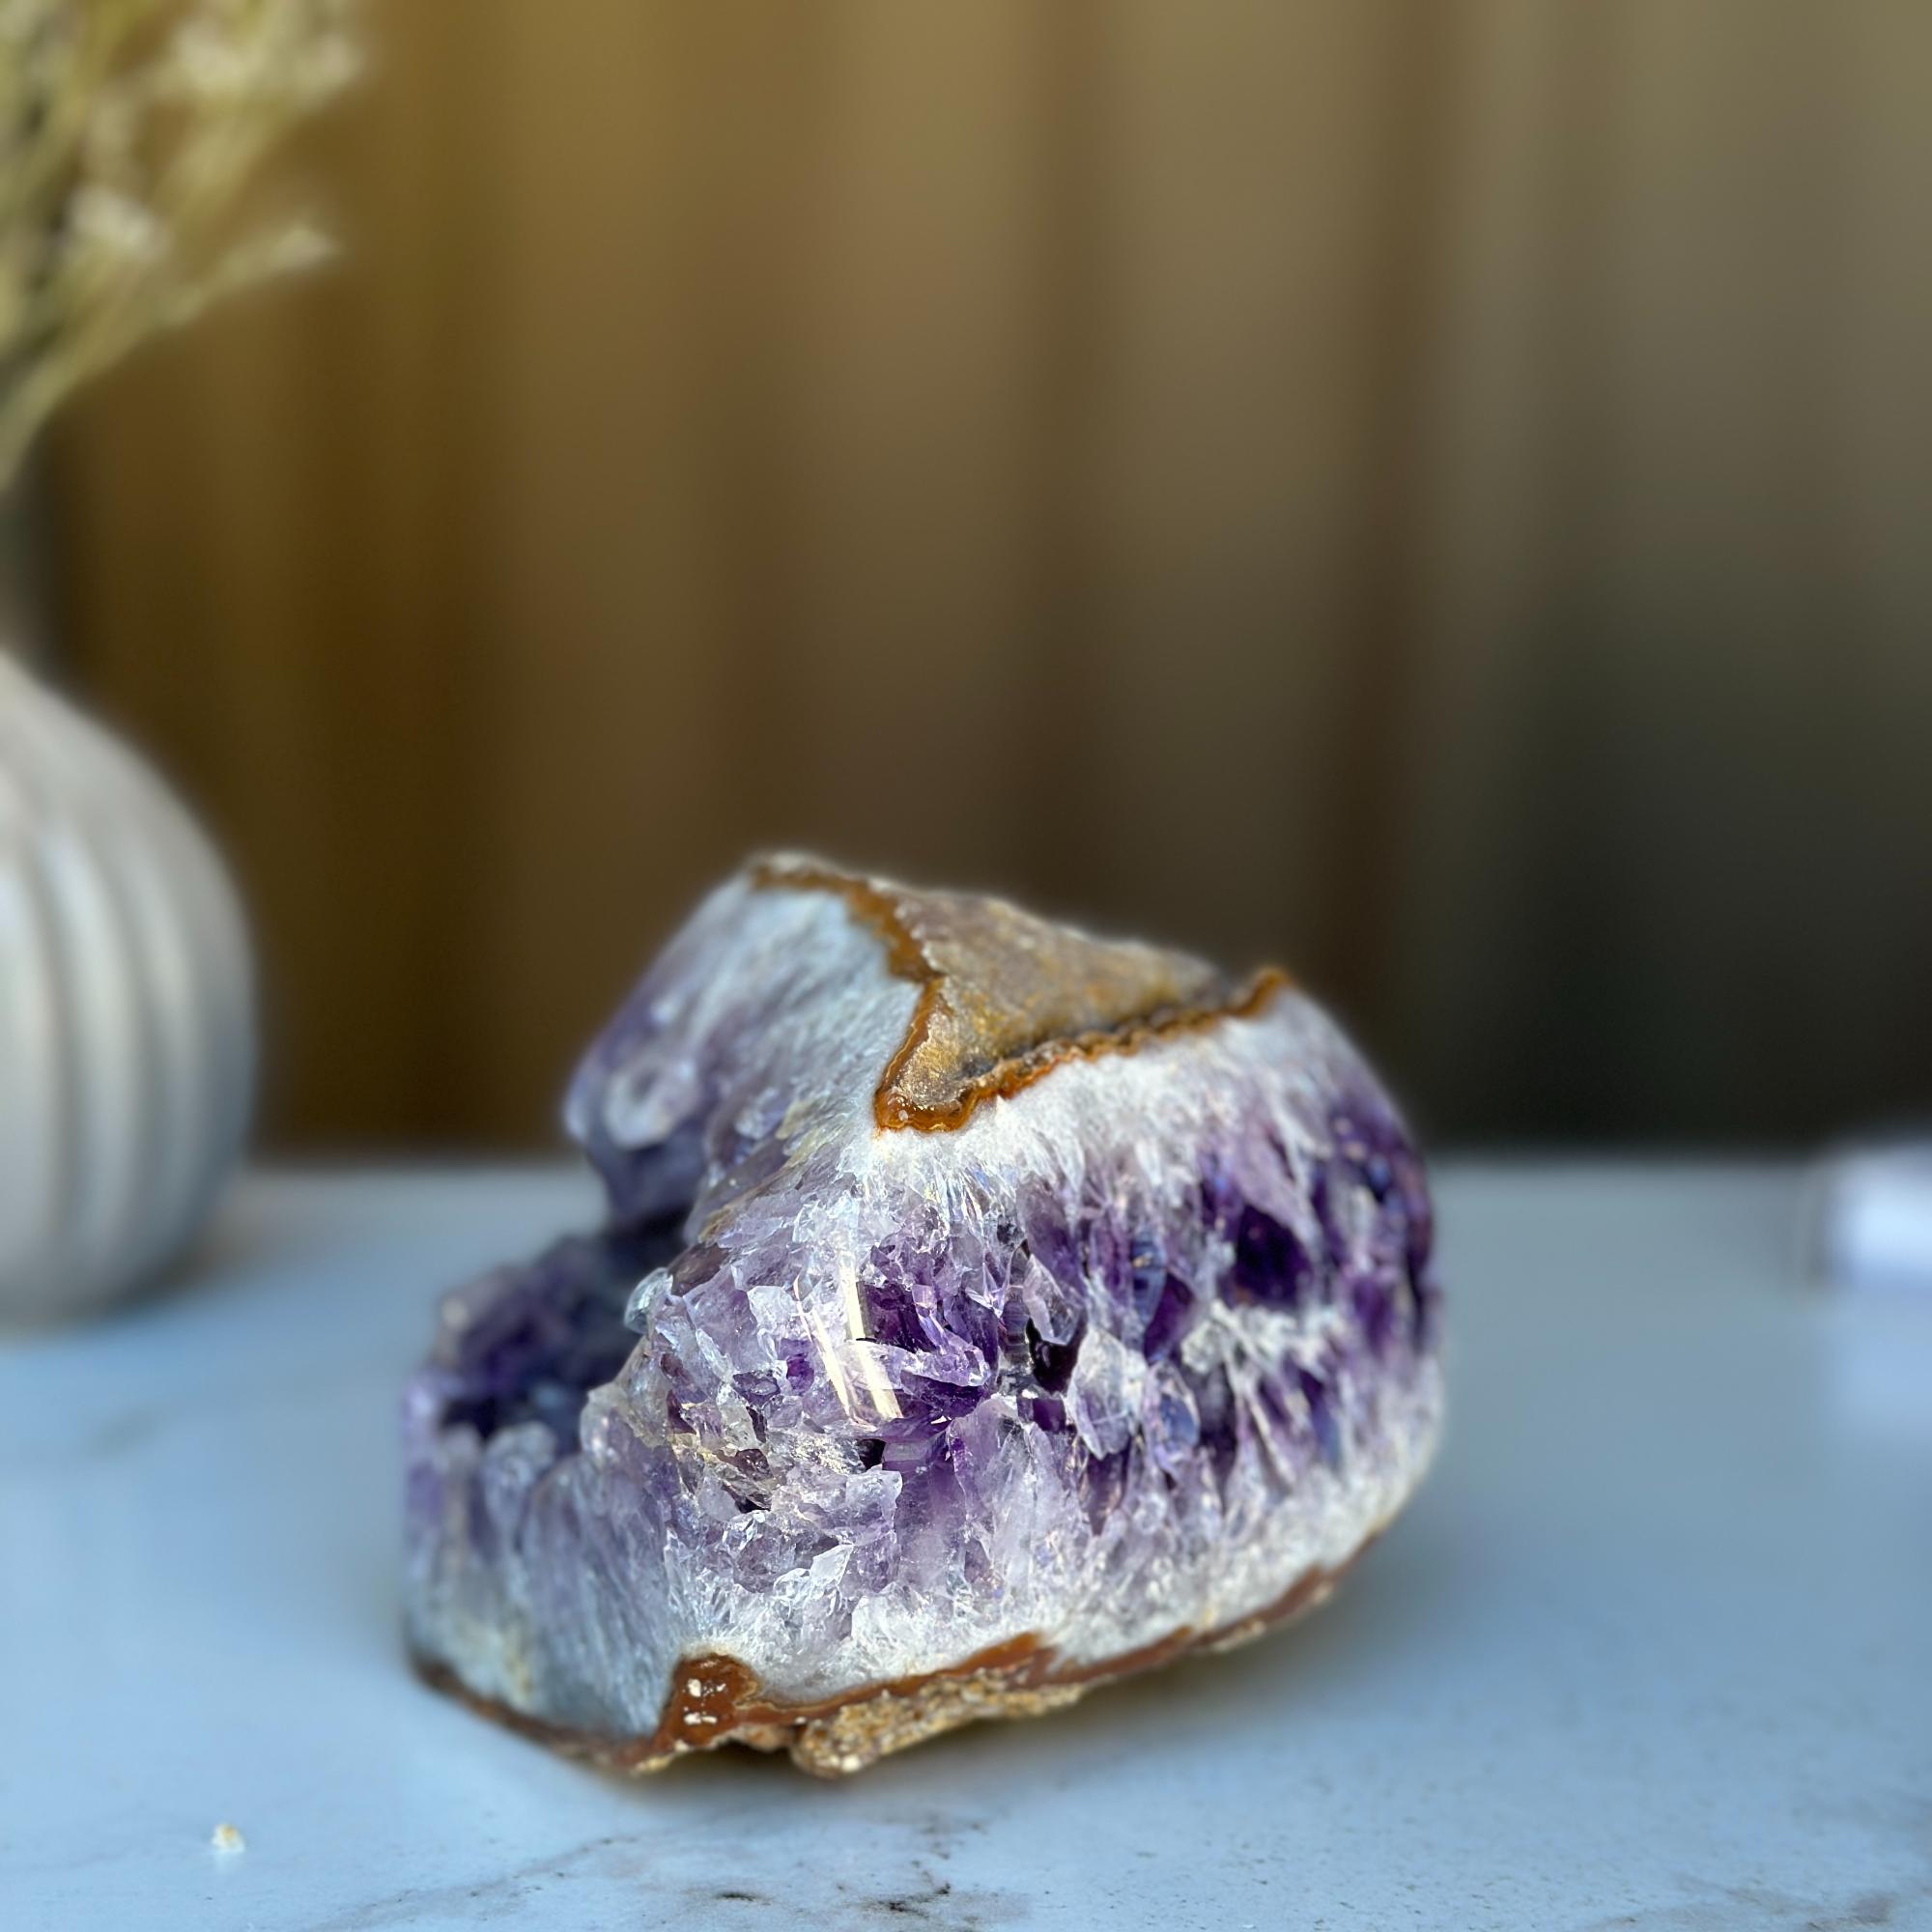 Amethyst Cave Geode with Agate Formations, Home Decor Crystal, High Quality Quartz Cluster